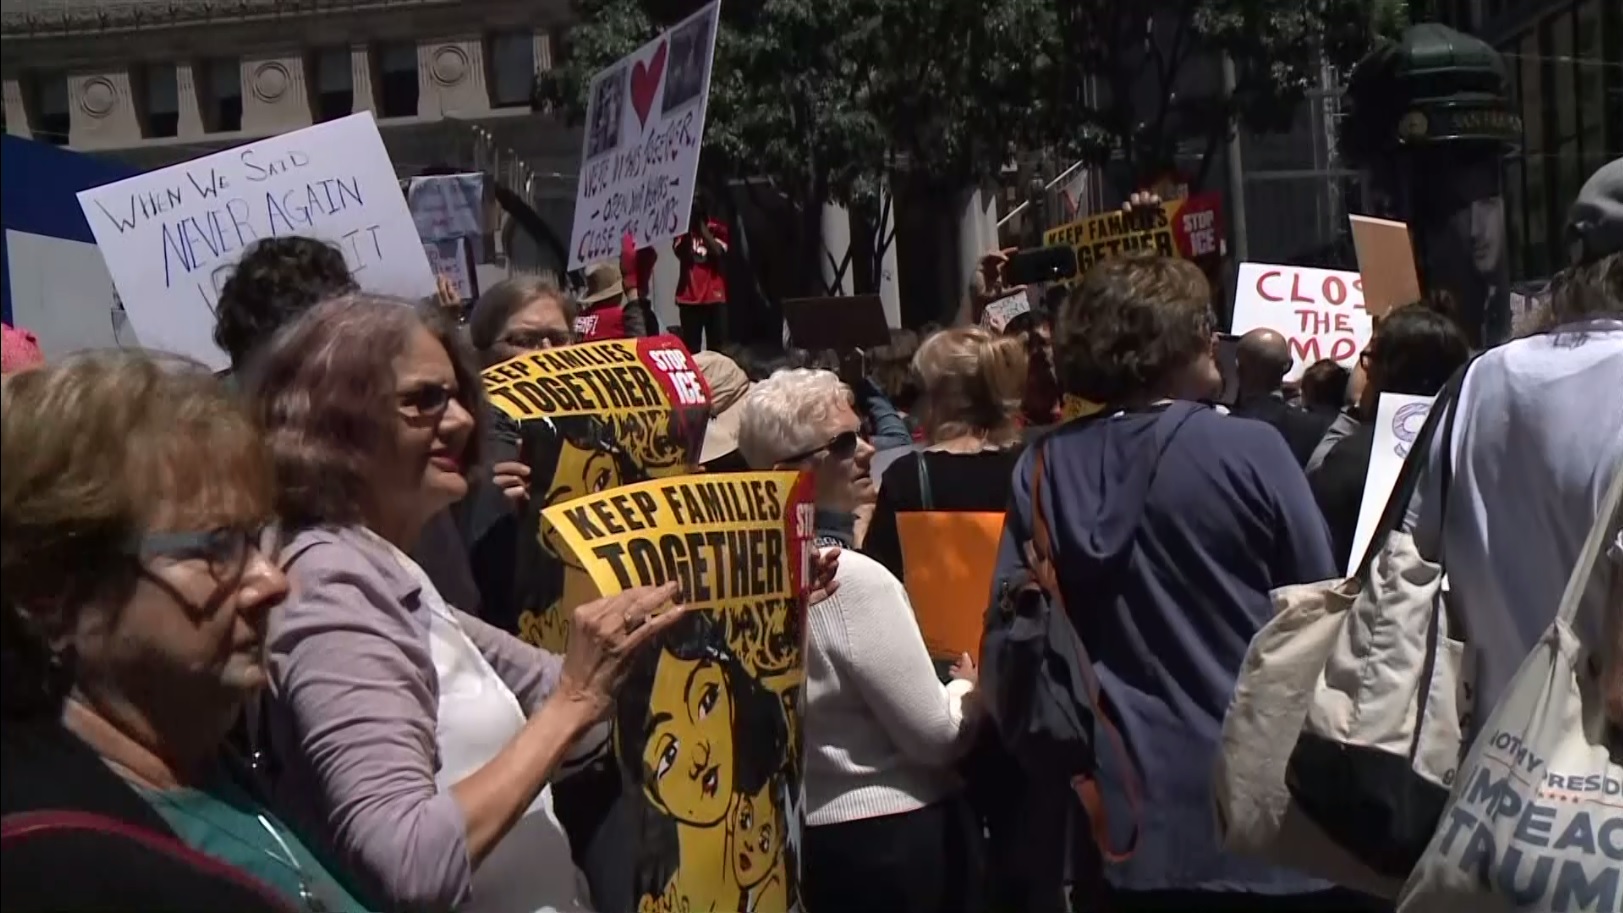 Marchers in San Francisco's Financial District protest detention facilities for migrants, July 2, 2019. (CBS)